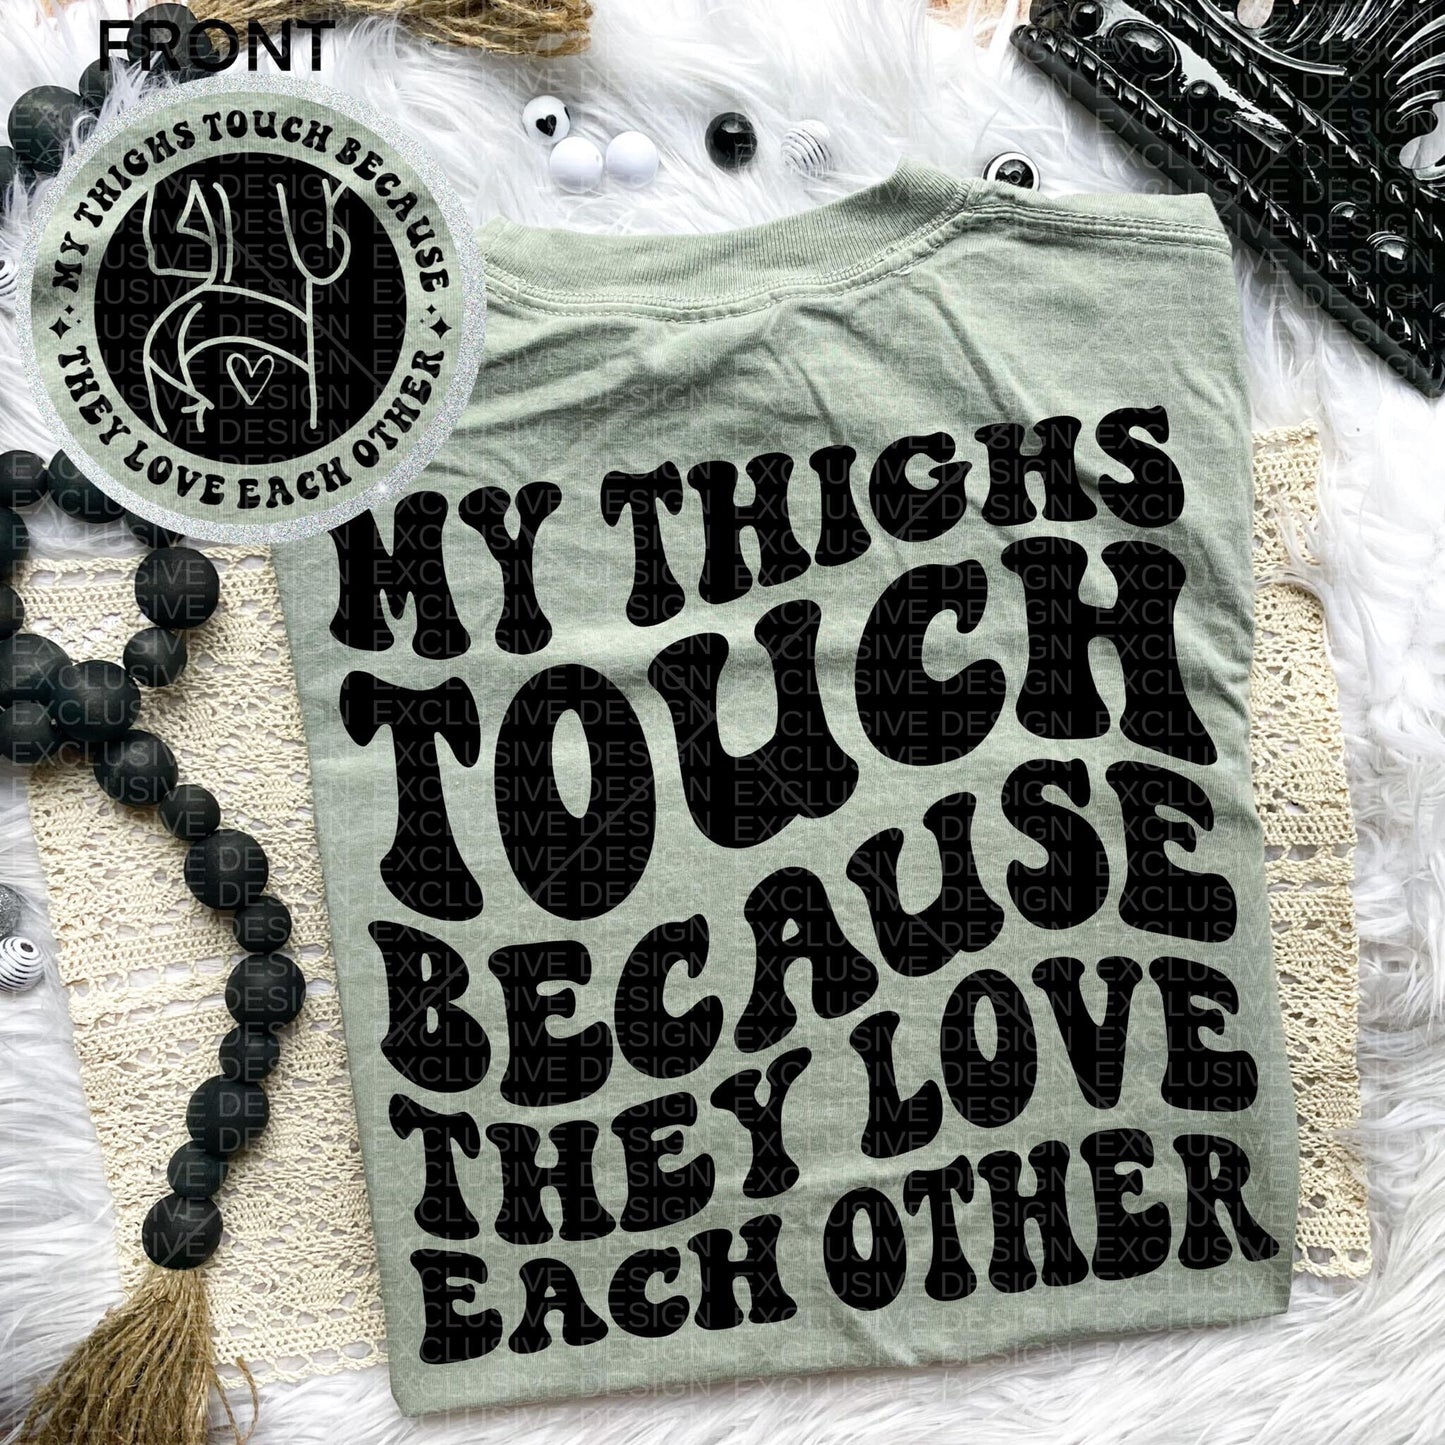 My Thighs Touch Comfort Colors Tee graphic tee Poet Street Boutique, Zad S SMOKESHOW 